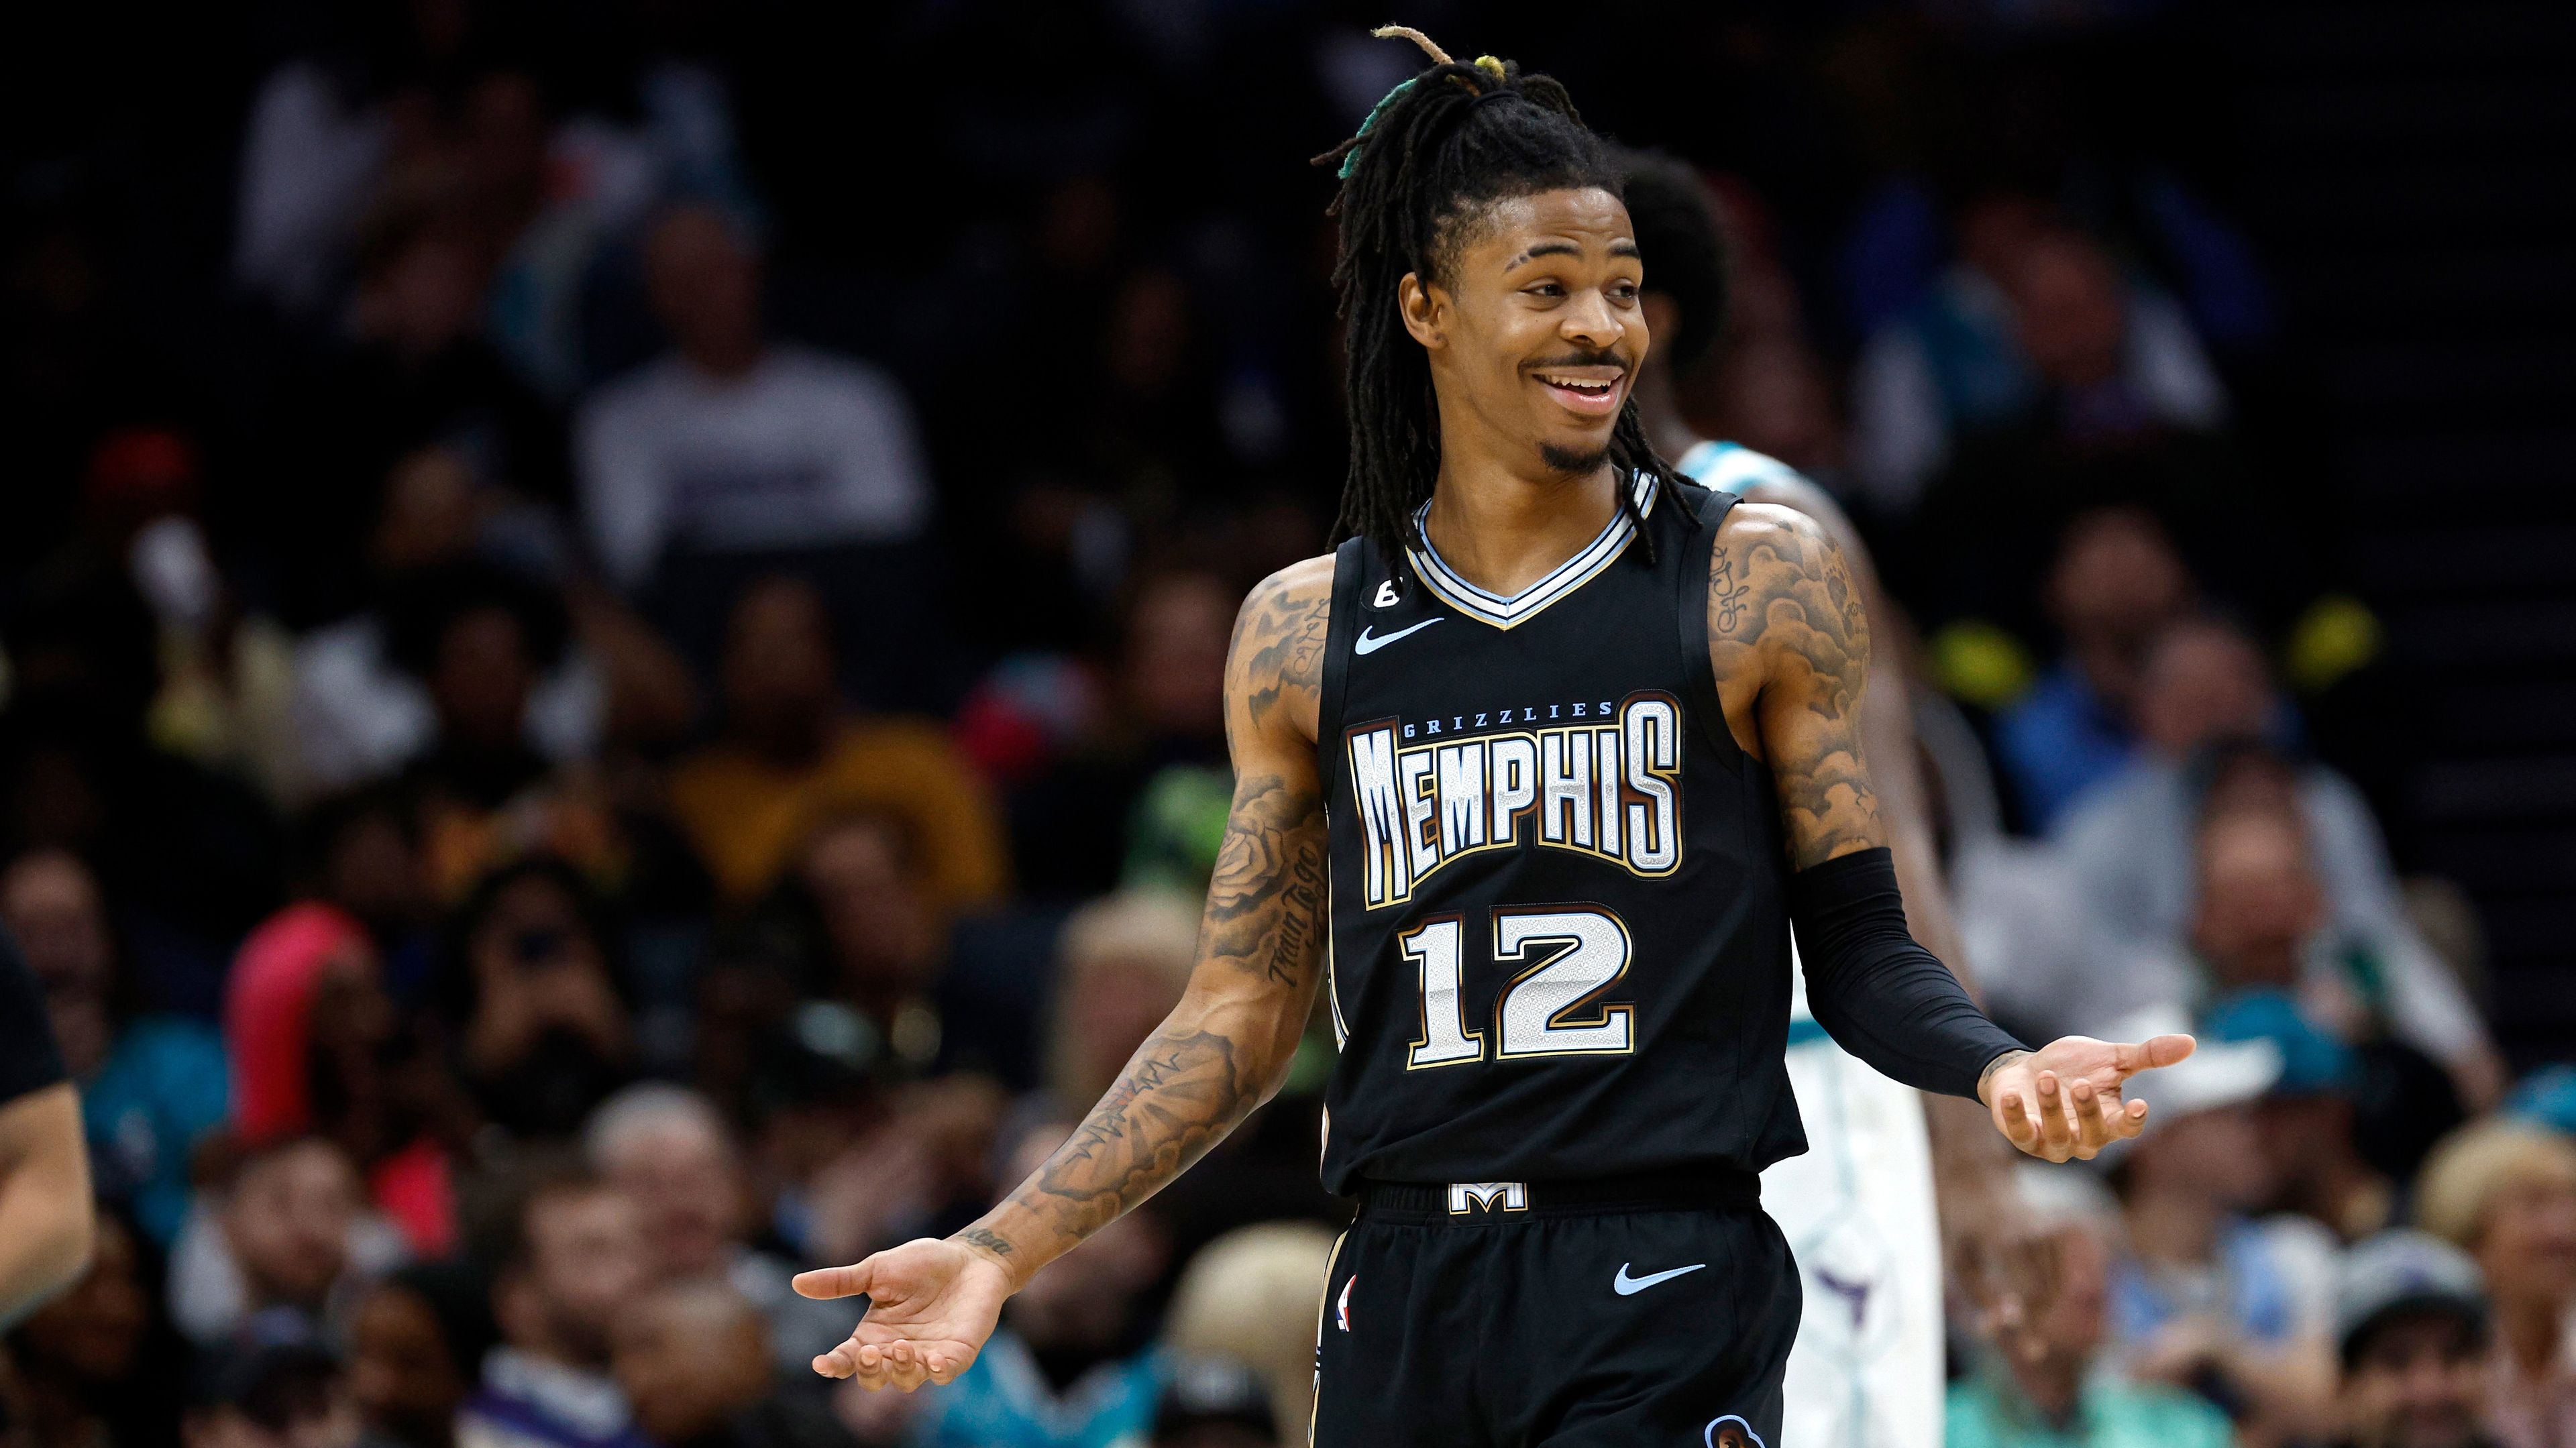 Ja Morant #12 of the Memphis Grizzlies reacts following a basket during the first quarter of the game against the Charlotte Hornets at Spectrum Center on January 04, 2023 in Charlotte, North Carolina. (Photo by Jared C. Tilton/Getty Images)